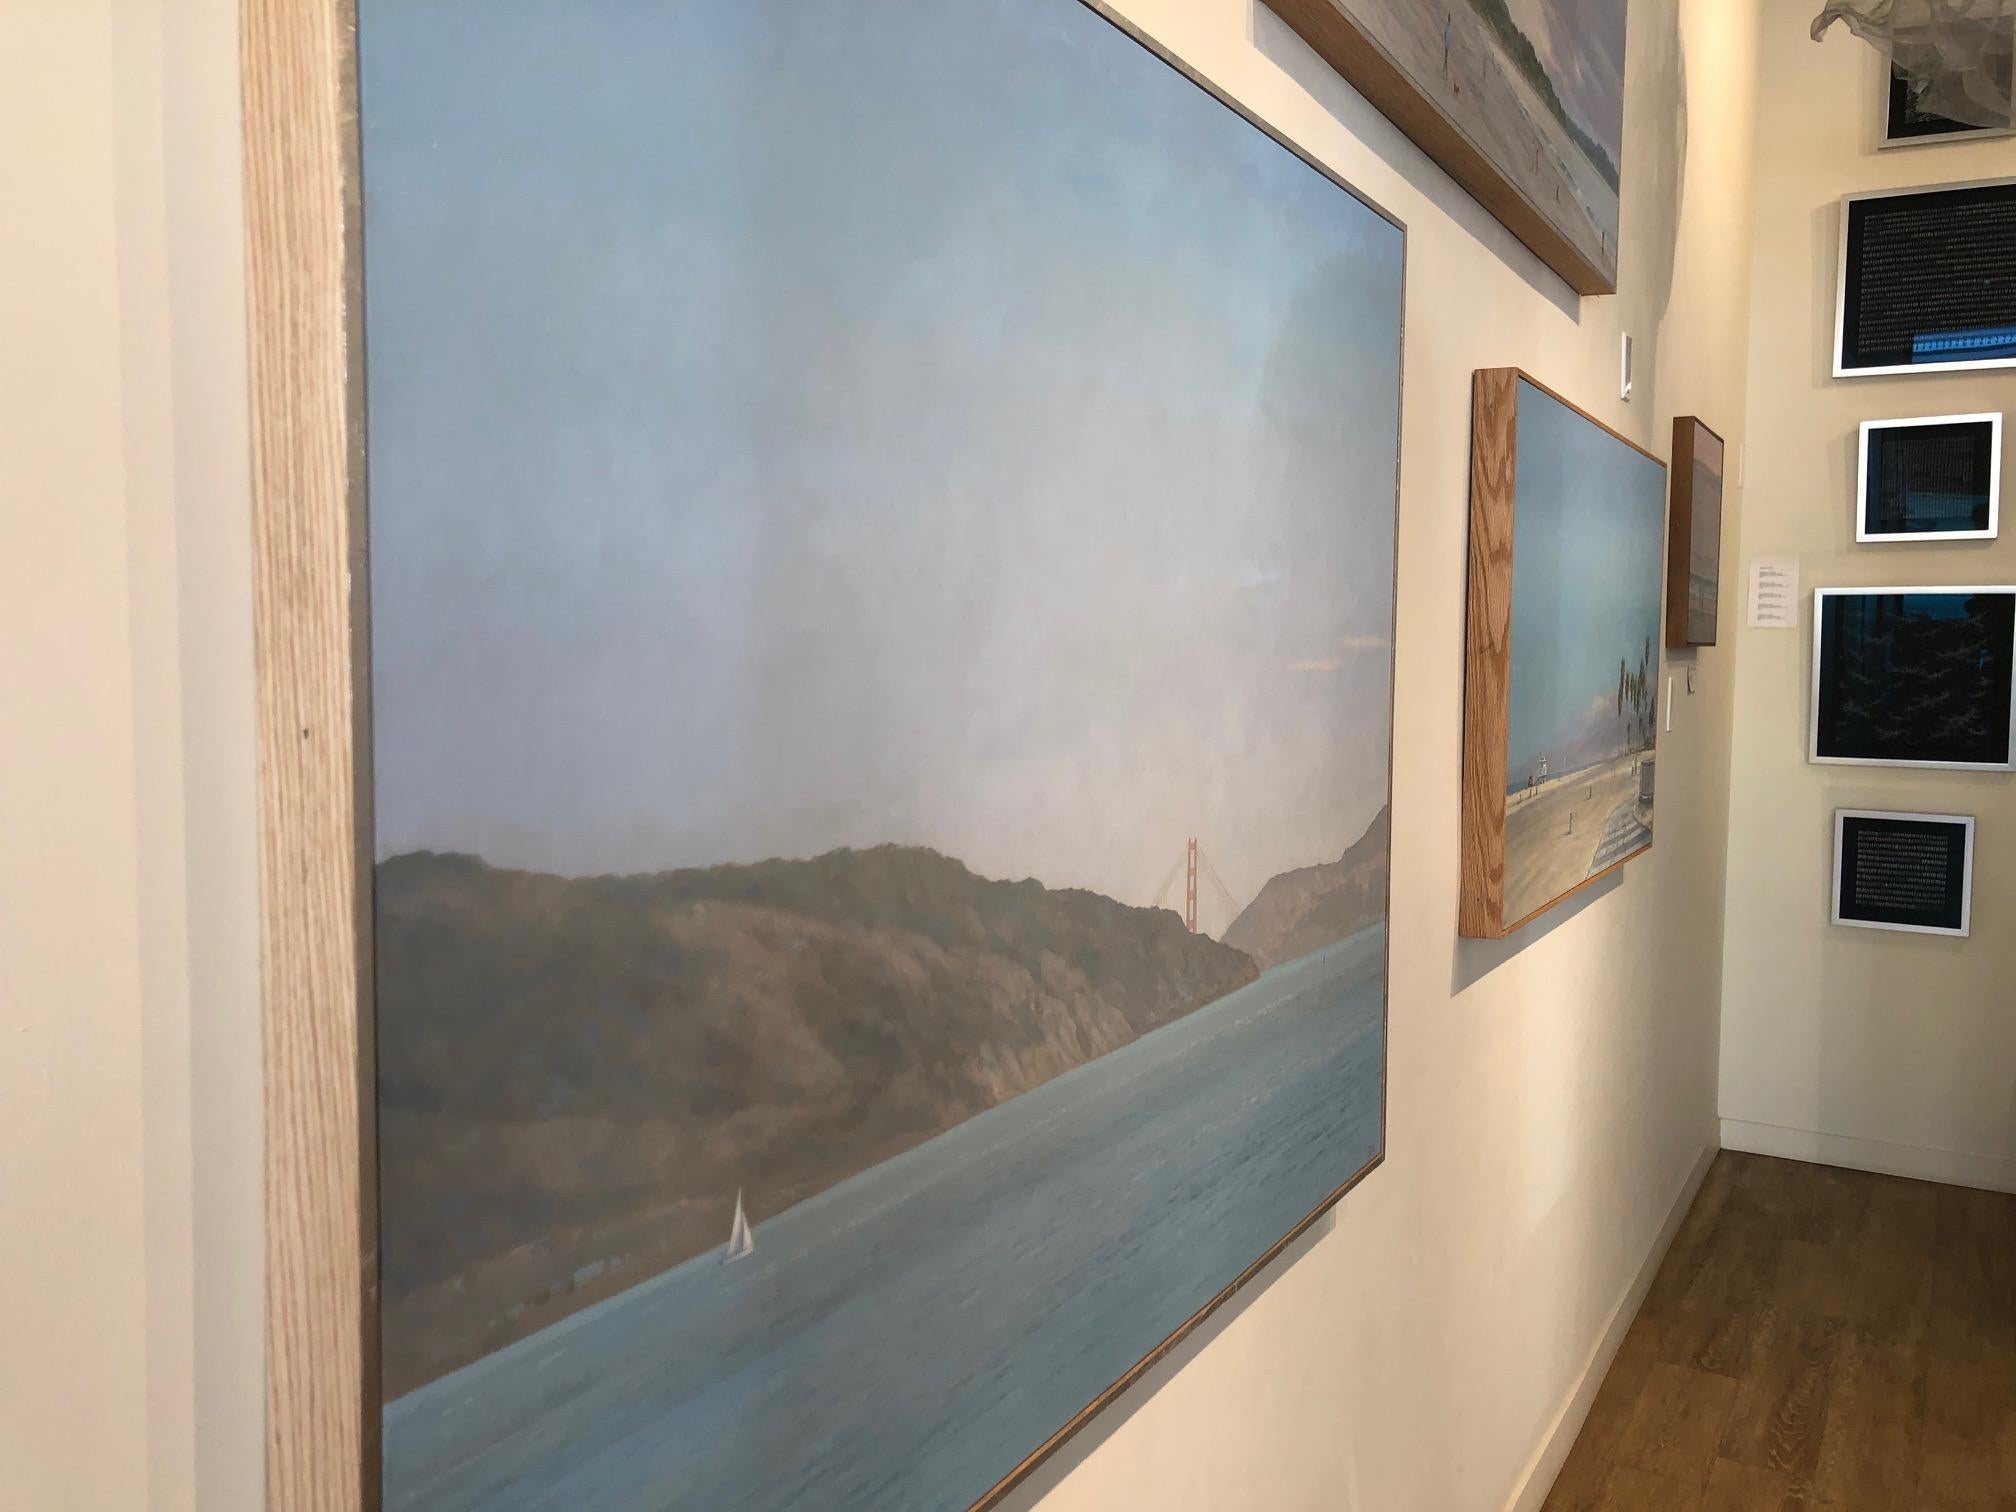 Iconic Golden Gate Bridge peeking from behind rolling California hills at Racoon Strait in San Francisco. Blue sky and water are the painting's focus with a glimpse of a sailing ship on calm water, in this American realist western landscape from